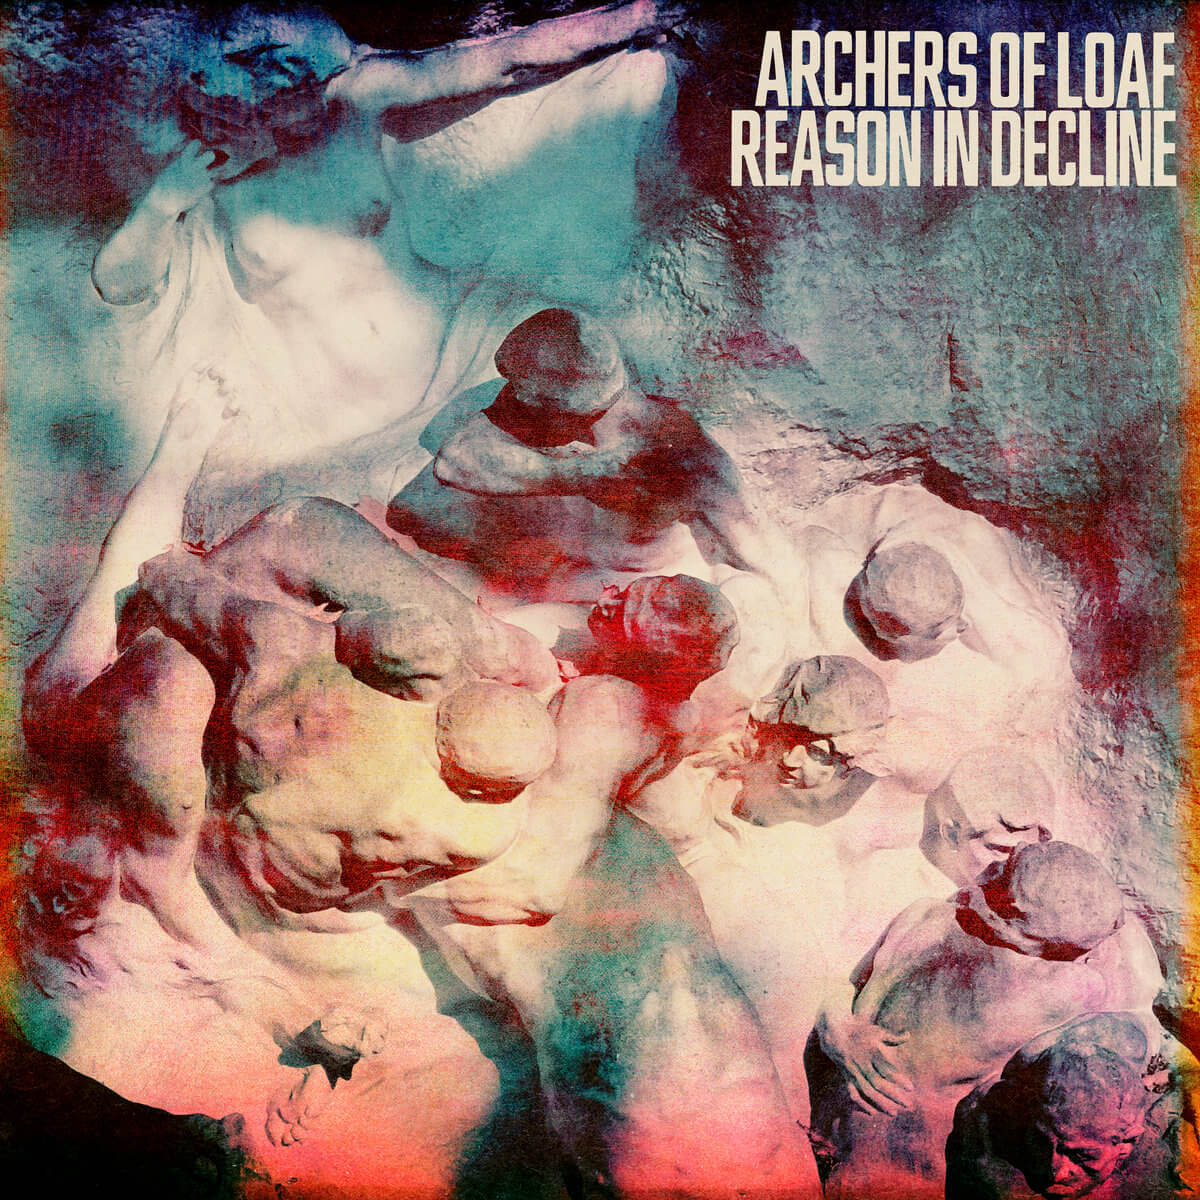 Reasons in Decline album by Archers of Loaf review by Tom Williams for Northern Transmissions